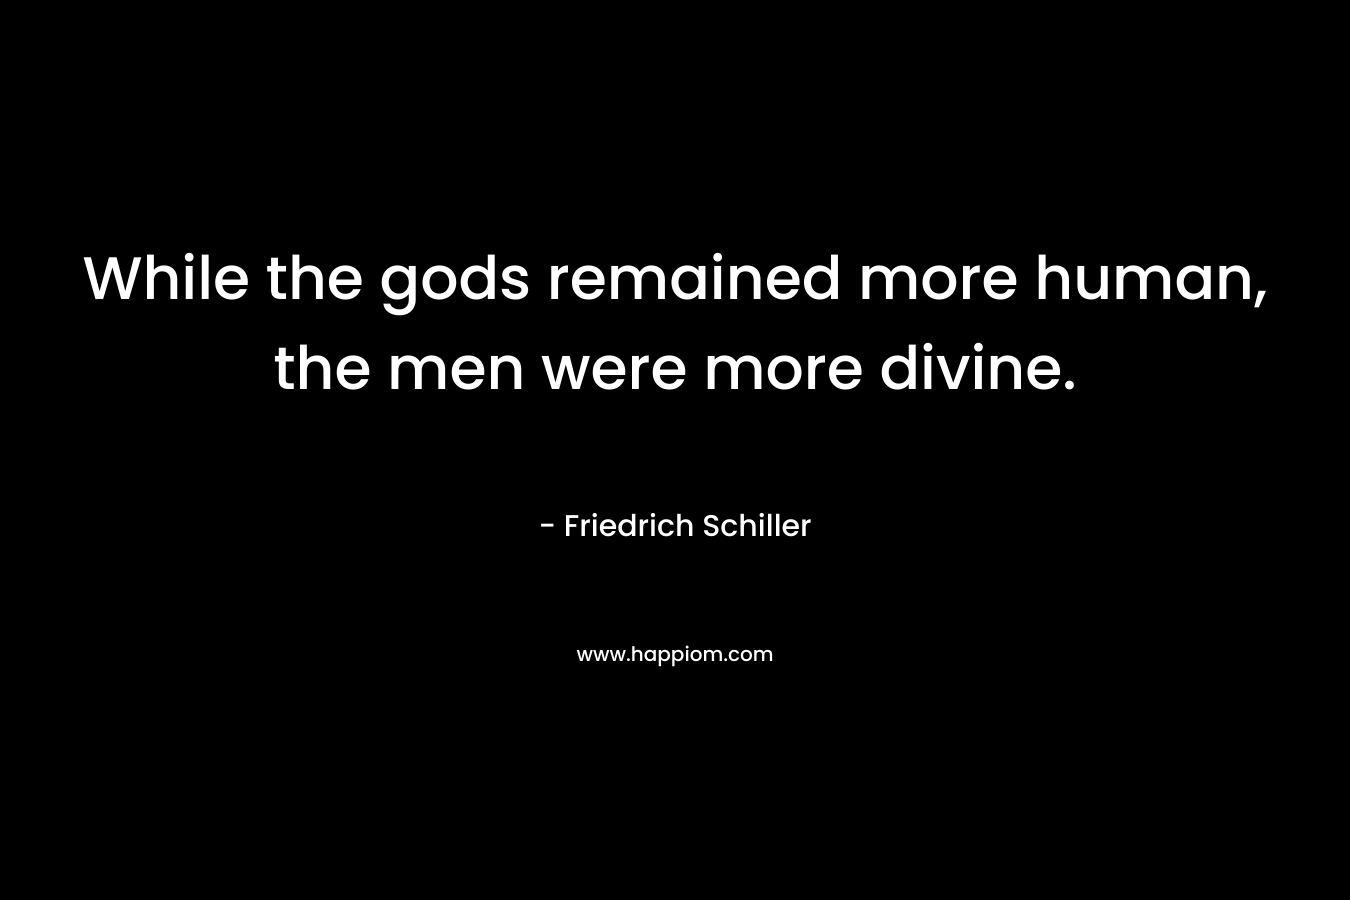 While the gods remained more human, the men were more divine. – Friedrich Schiller